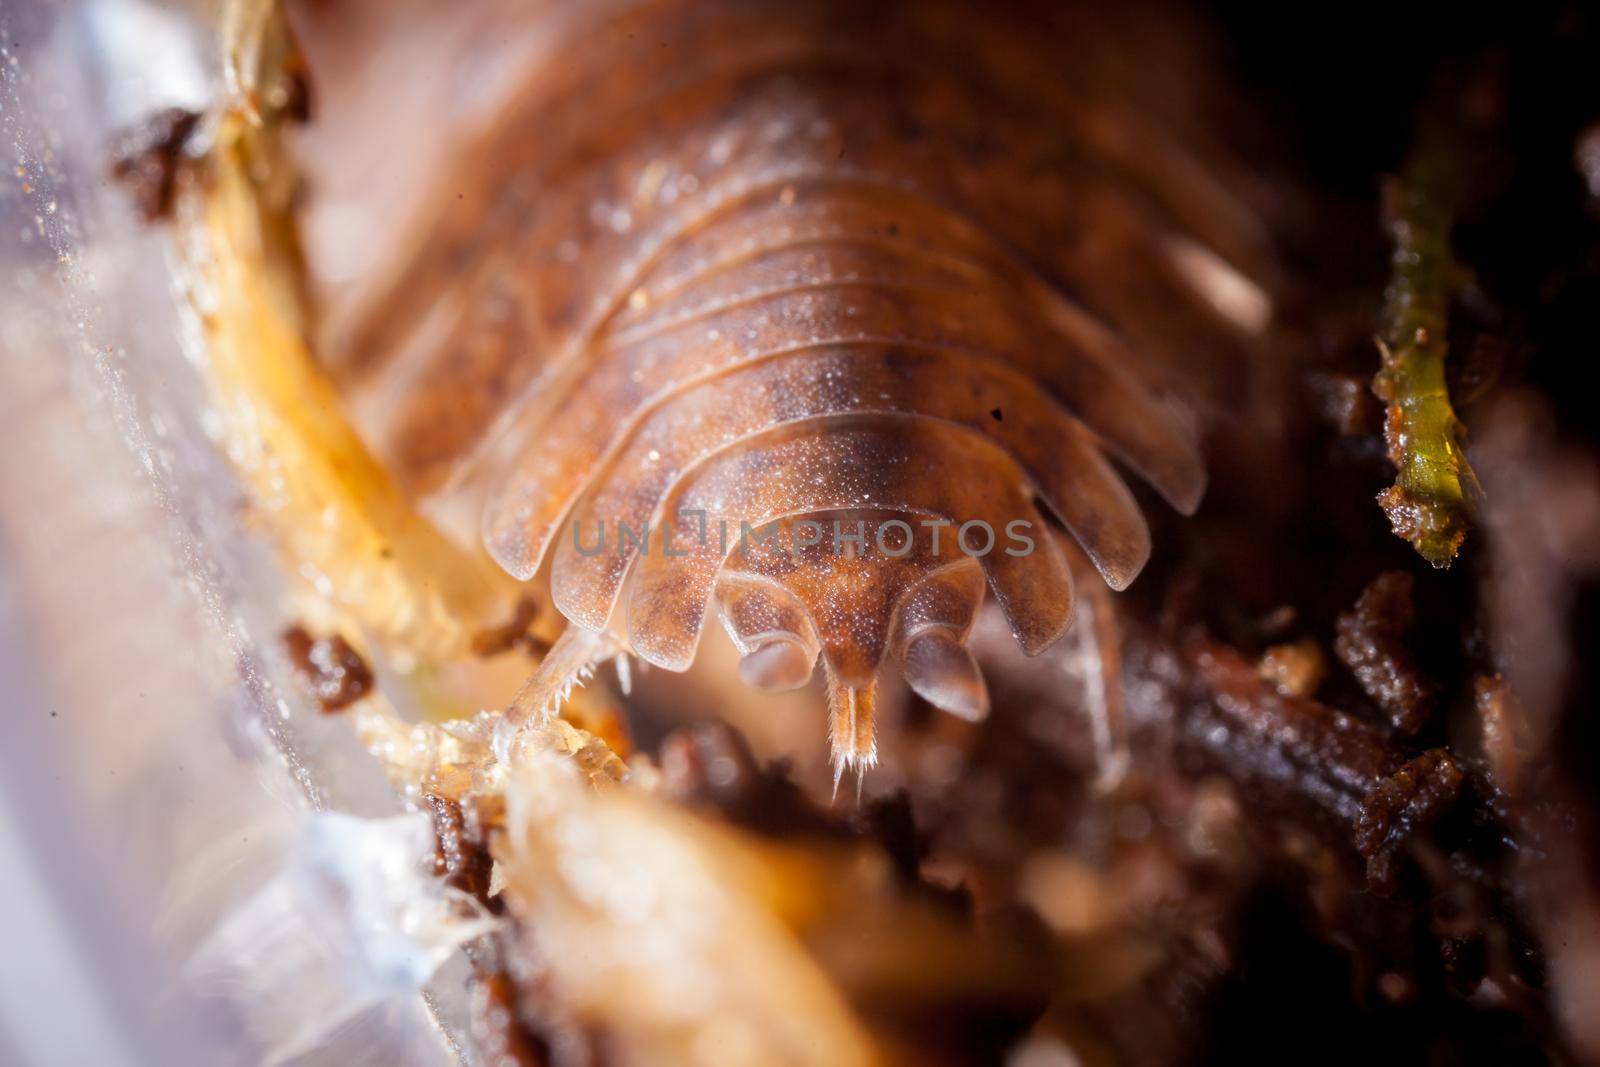 A brown spotted woodlouse Trachelipus mostarensis on hands by RosaJay